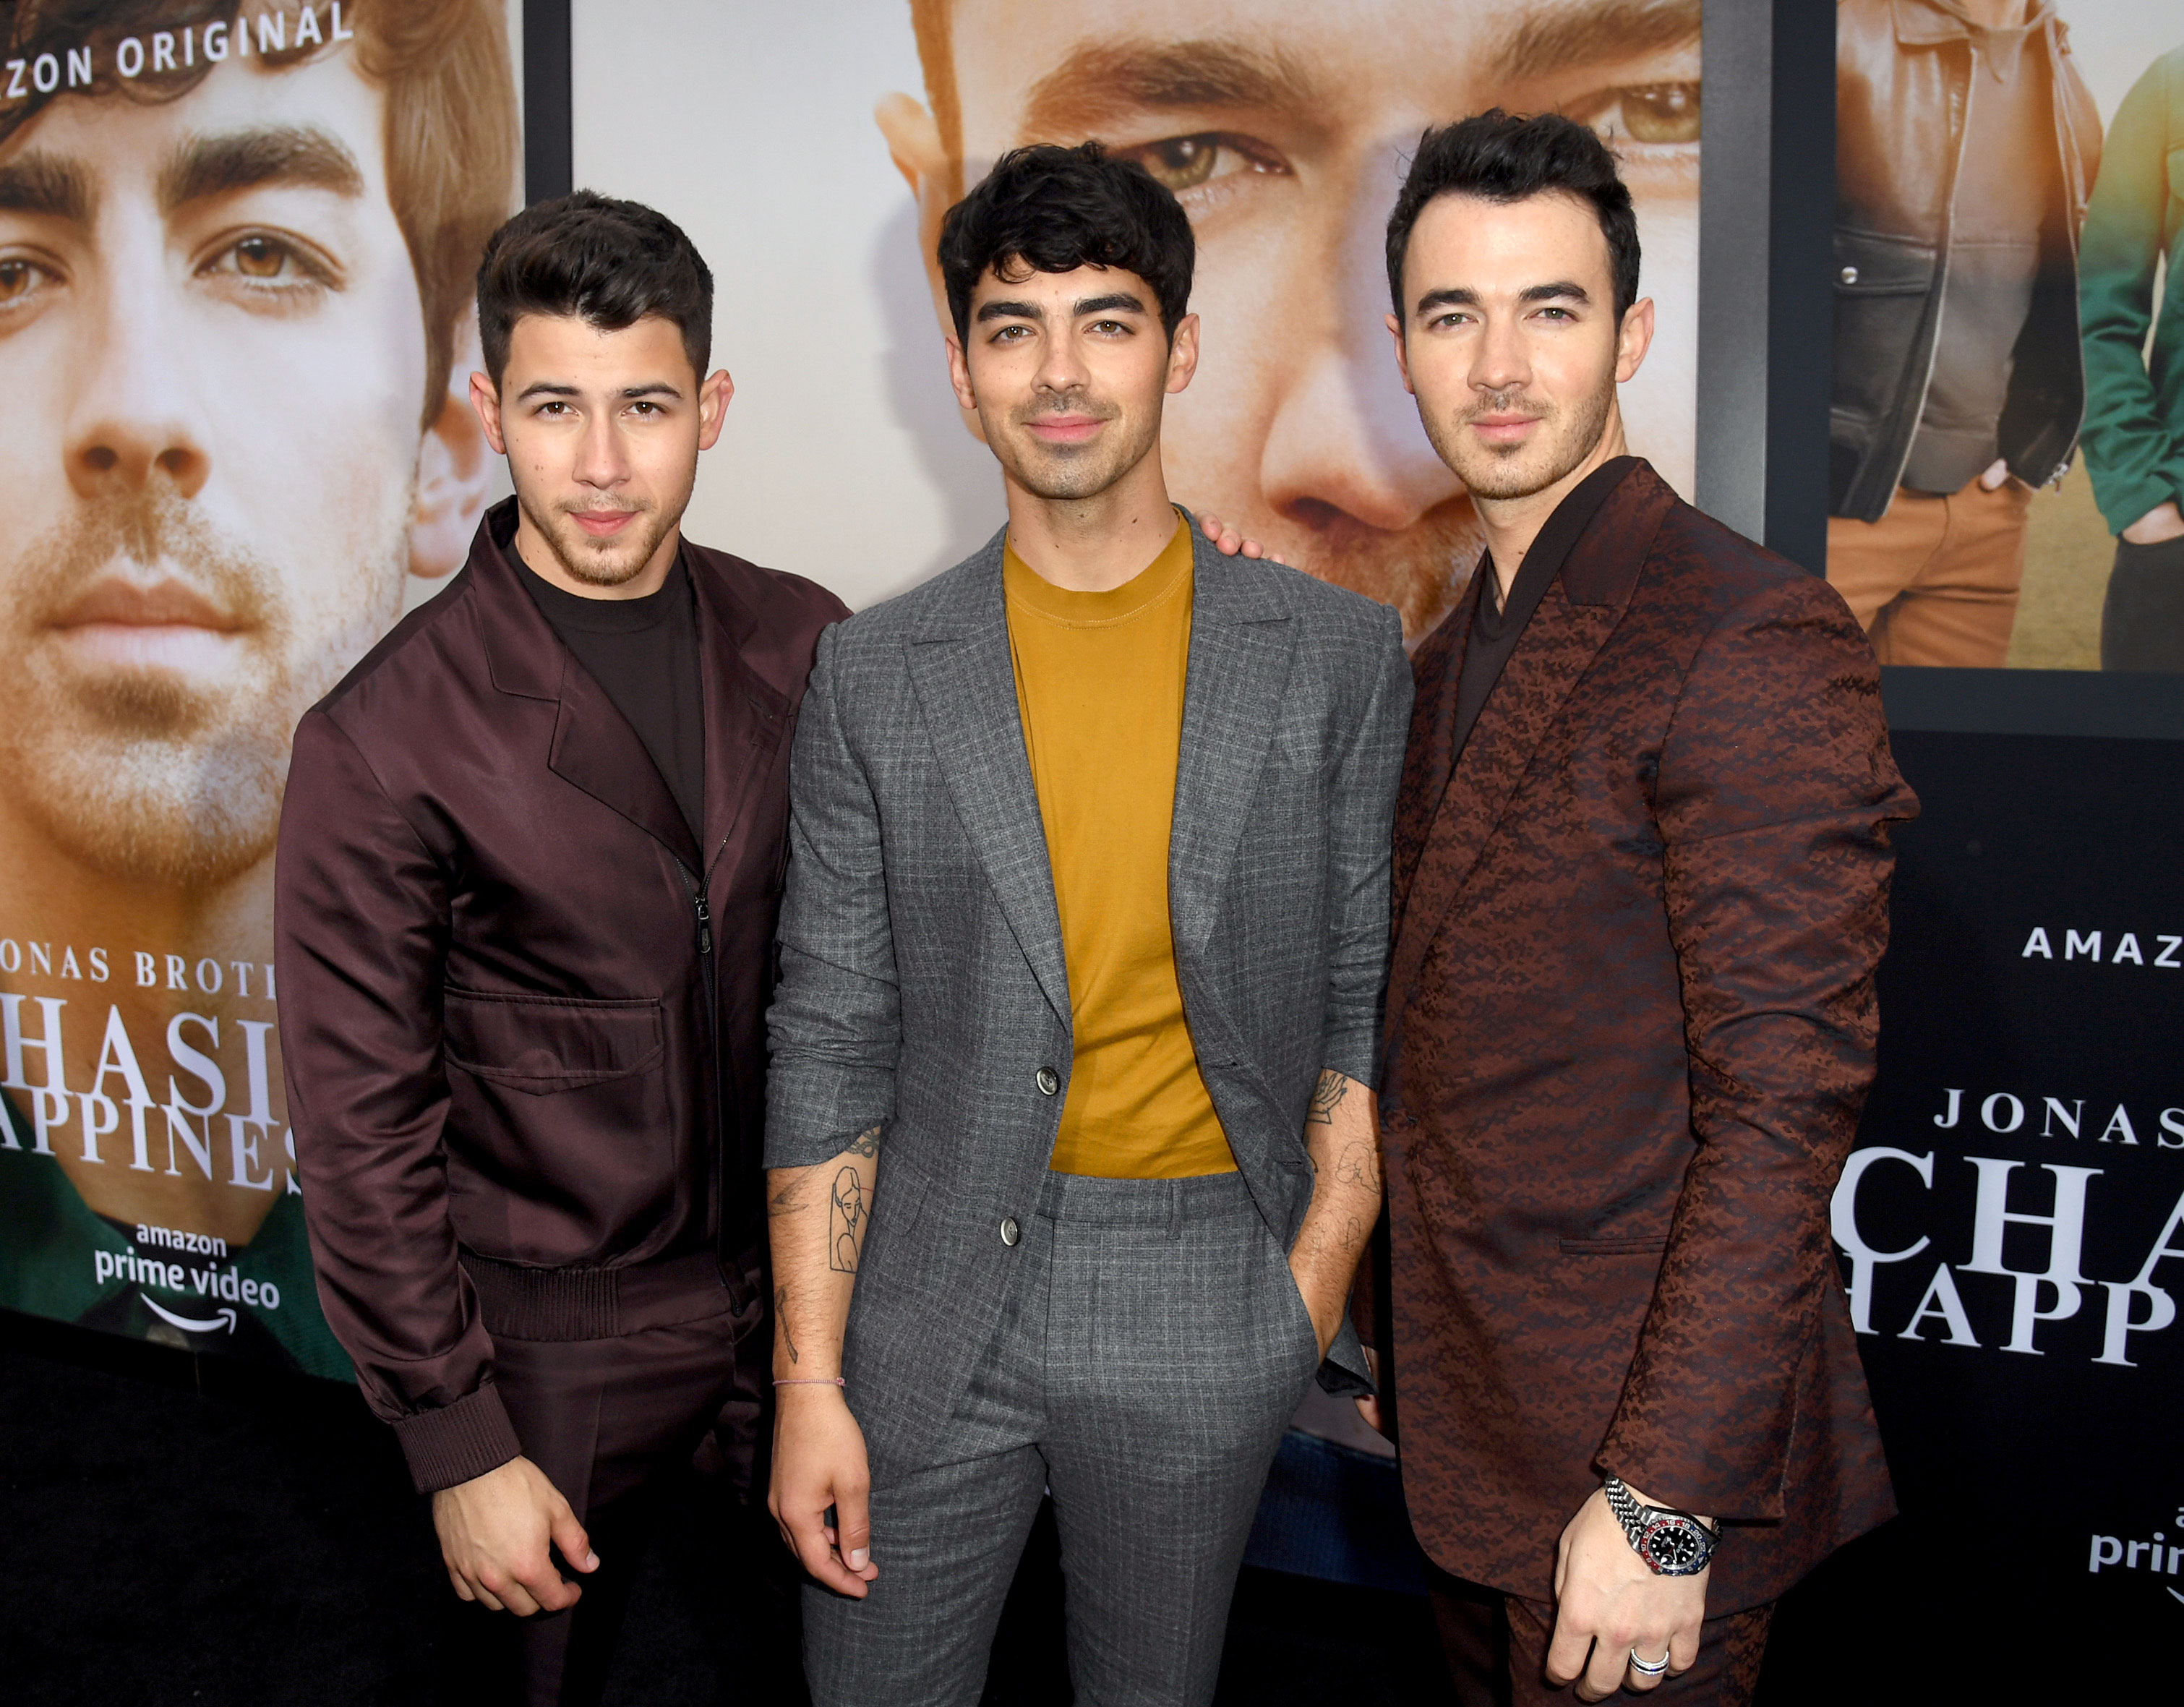 The Jonas Brothers: Everything you need to know about the musical siblings, Entertainment